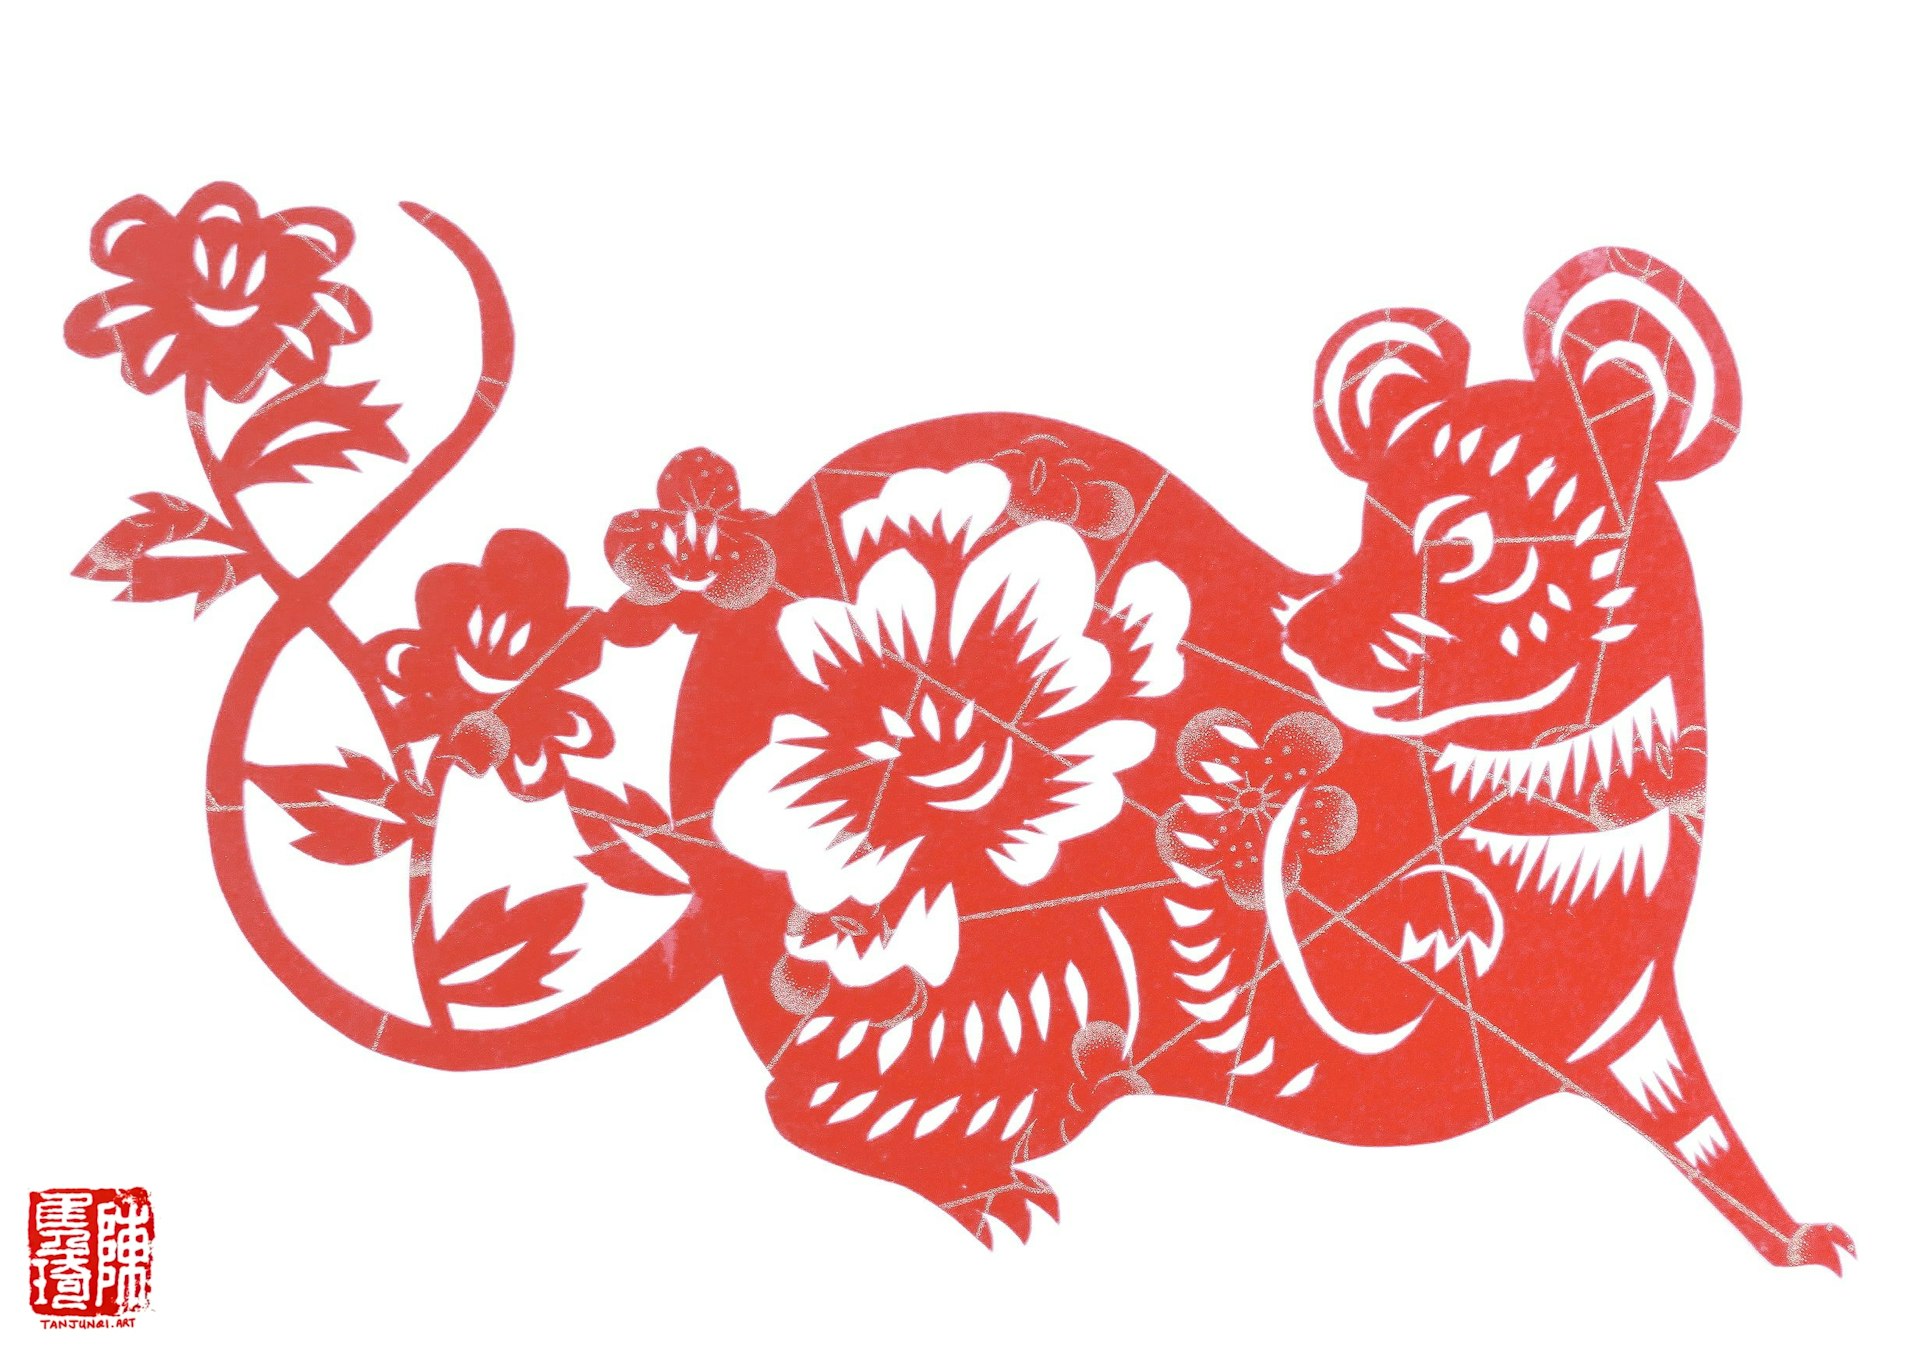 Chinese papercut of a rat pausing mid-crawl to look back over its shoulder. Flower blossoms adorn its back and tail.